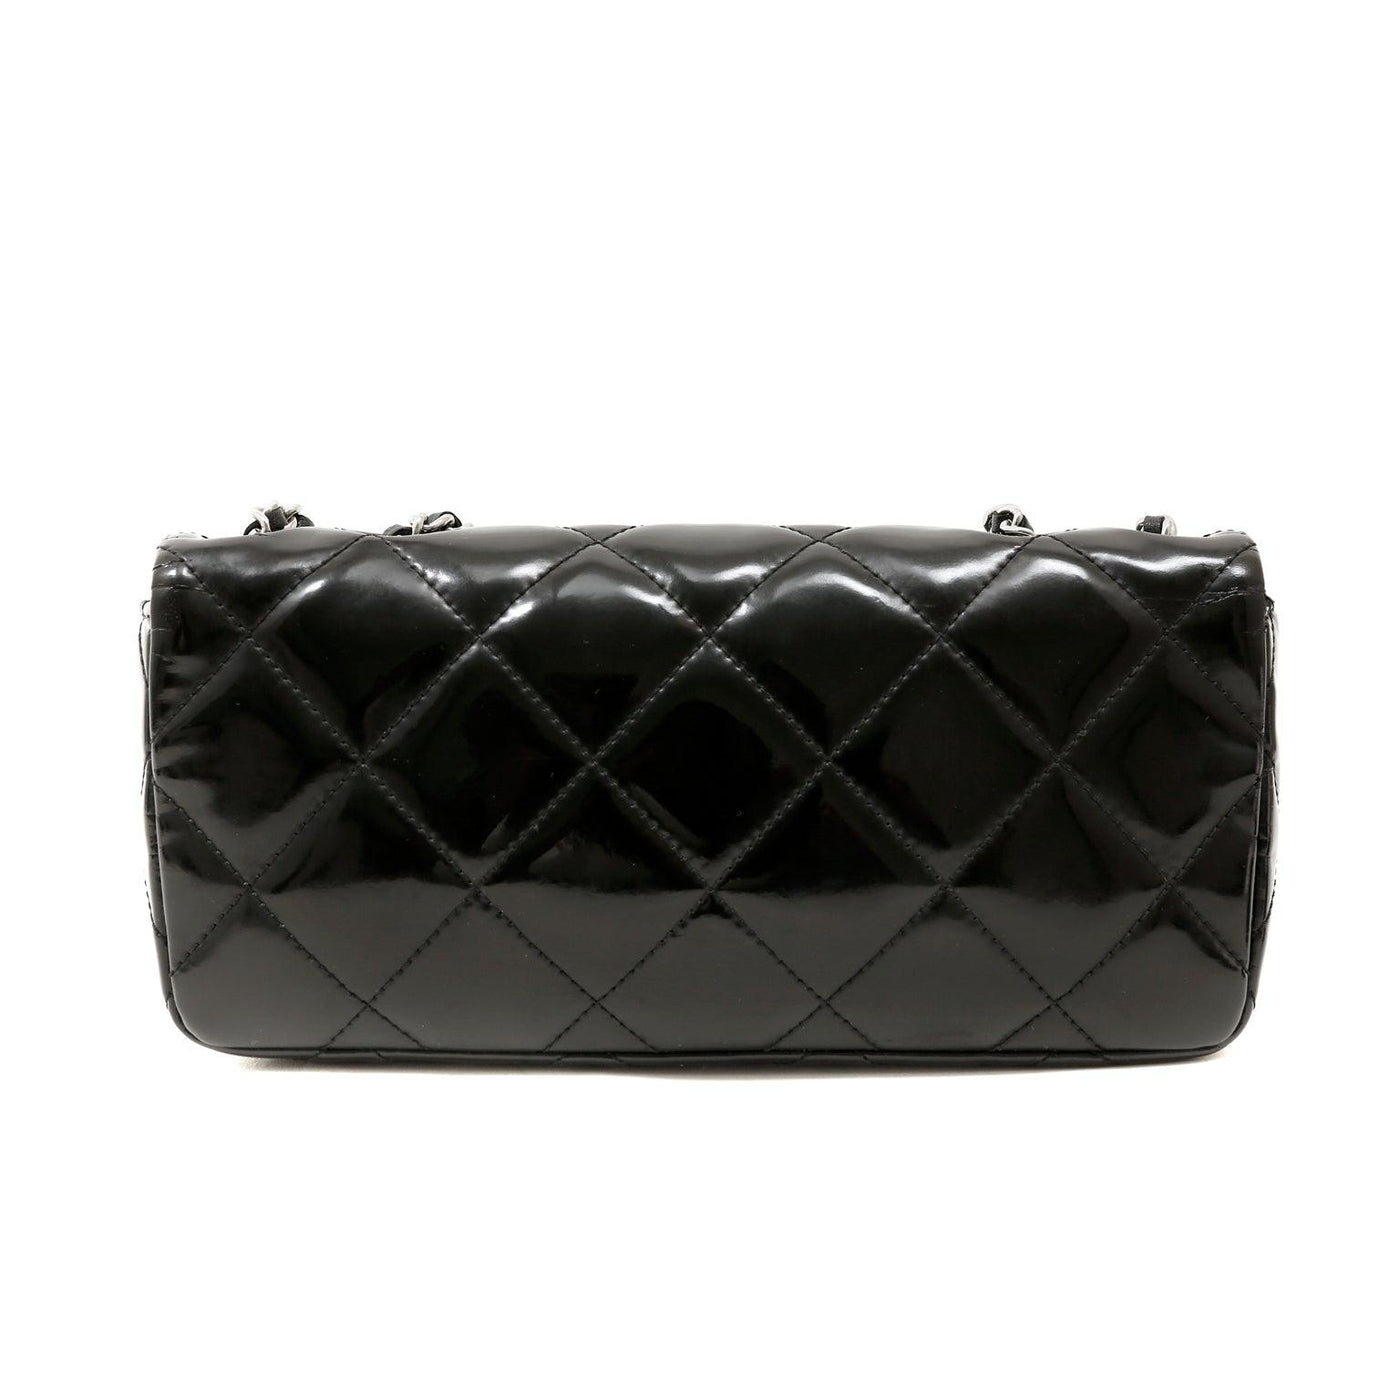 Chanel Black Patent Leather East West Reissue Flap Bag – Only Authentics